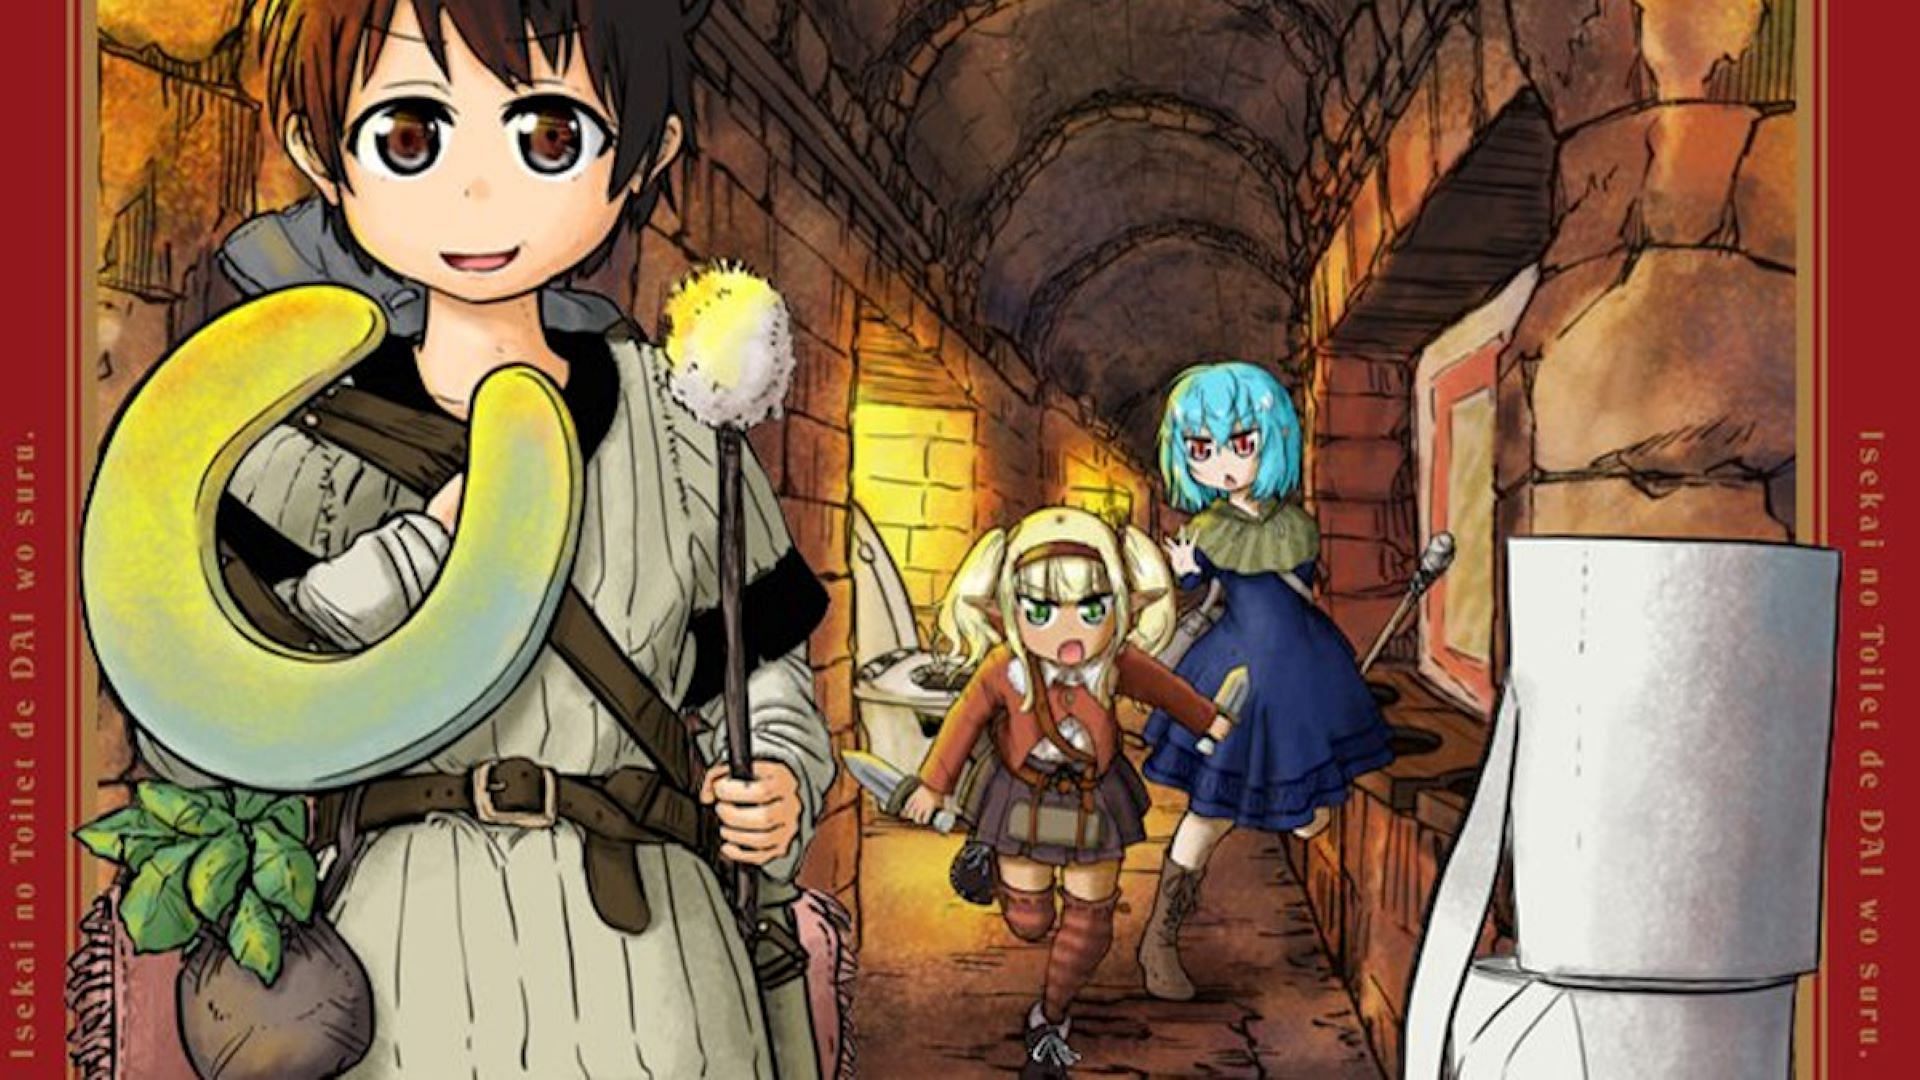 Dungeon Toilet Volume 1 cover. (Image via Roots) The sword protagonist Teacher and his wielder, Fran. (Image via C2C)